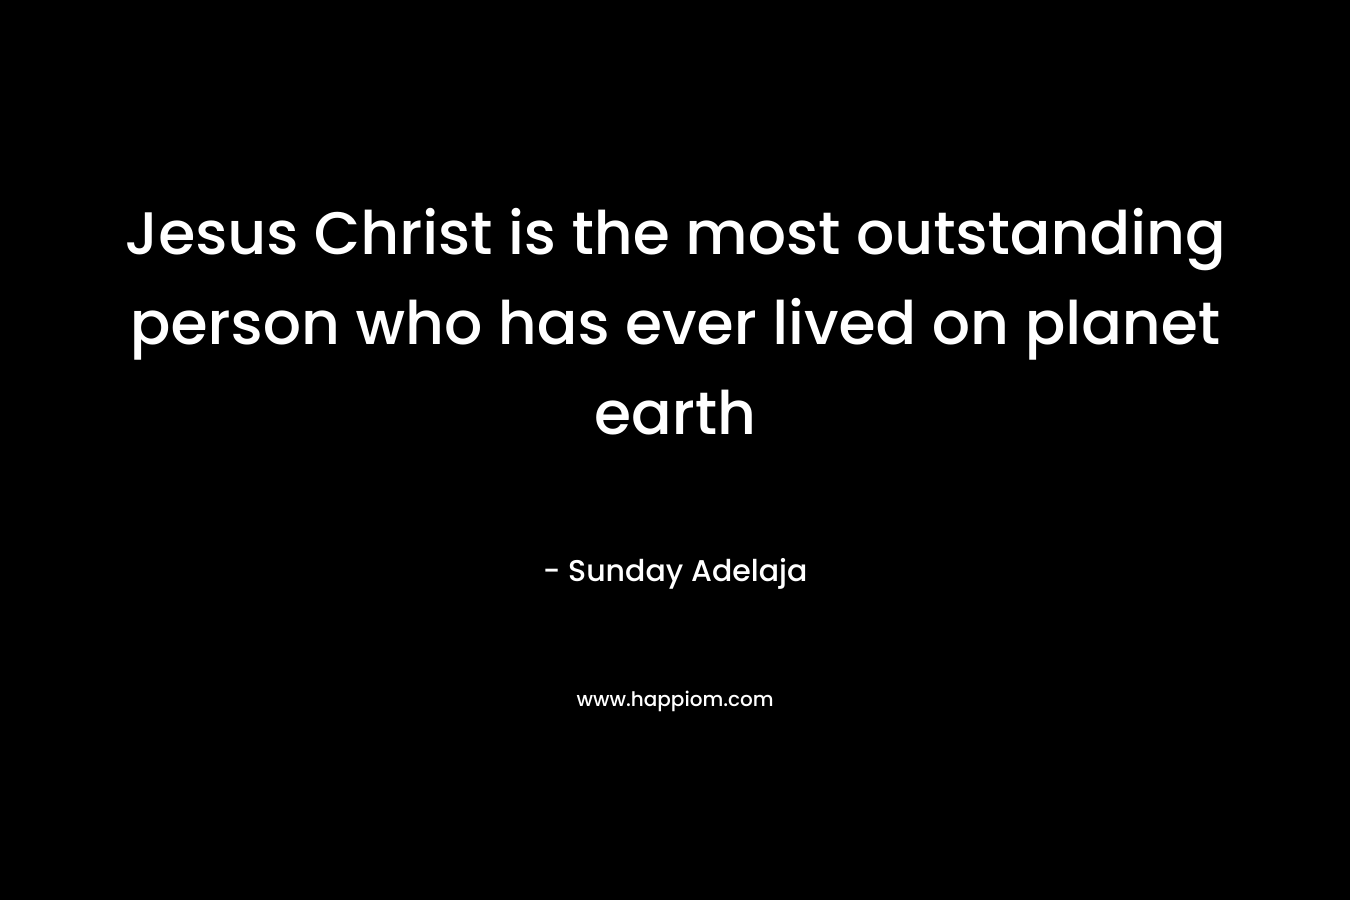 Jesus Christ is the most outstanding person who has ever lived on planet earth – Sunday Adelaja